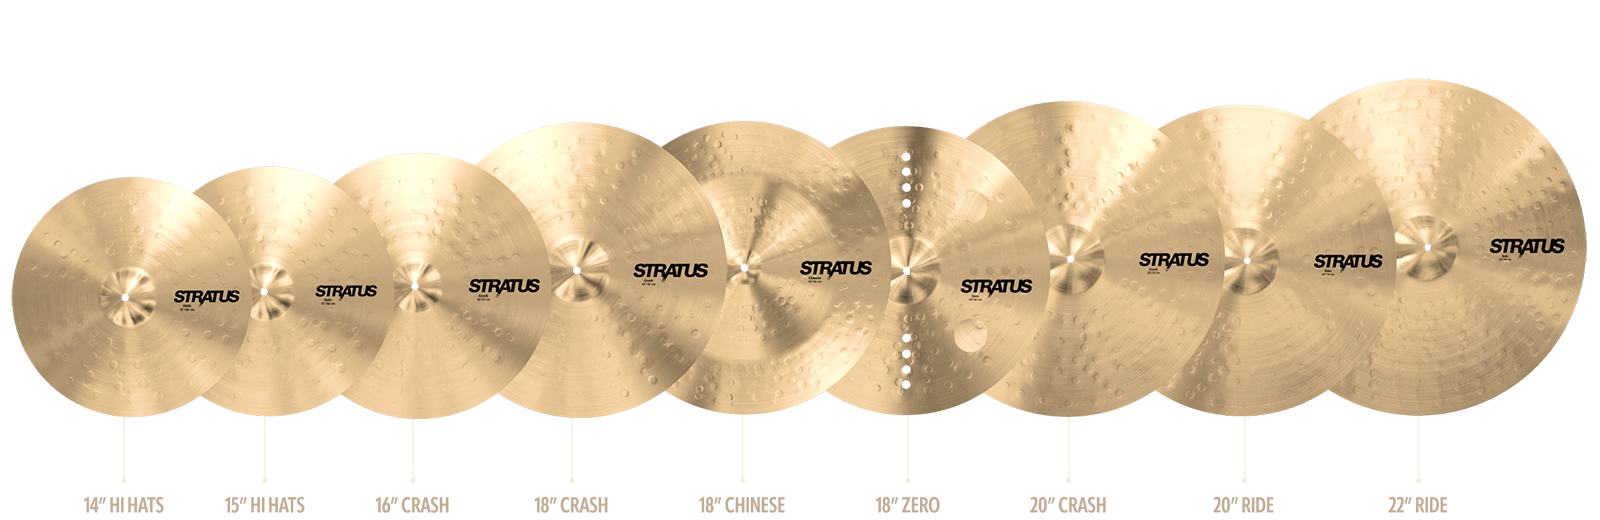 row of all stratus cymbals in the series